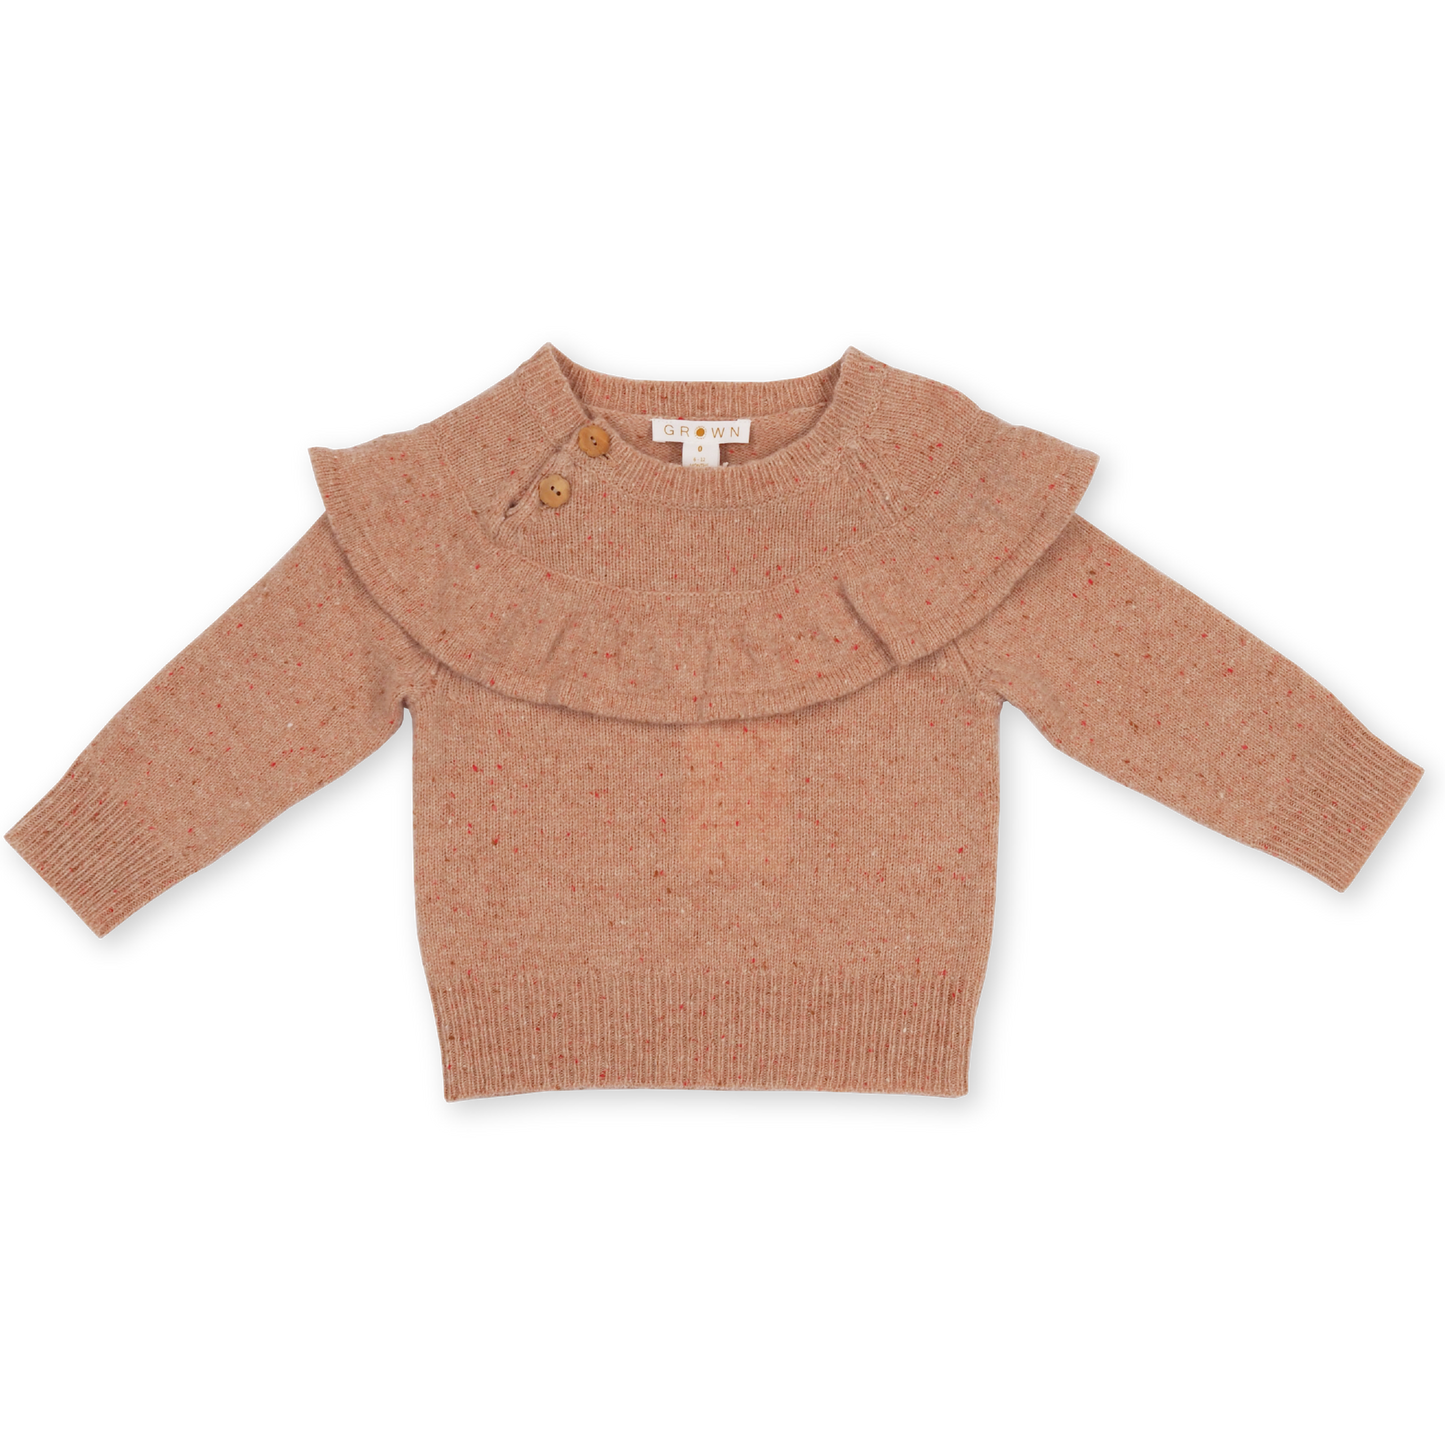 Grown Speckled Merino Frill Pull Over - Coral